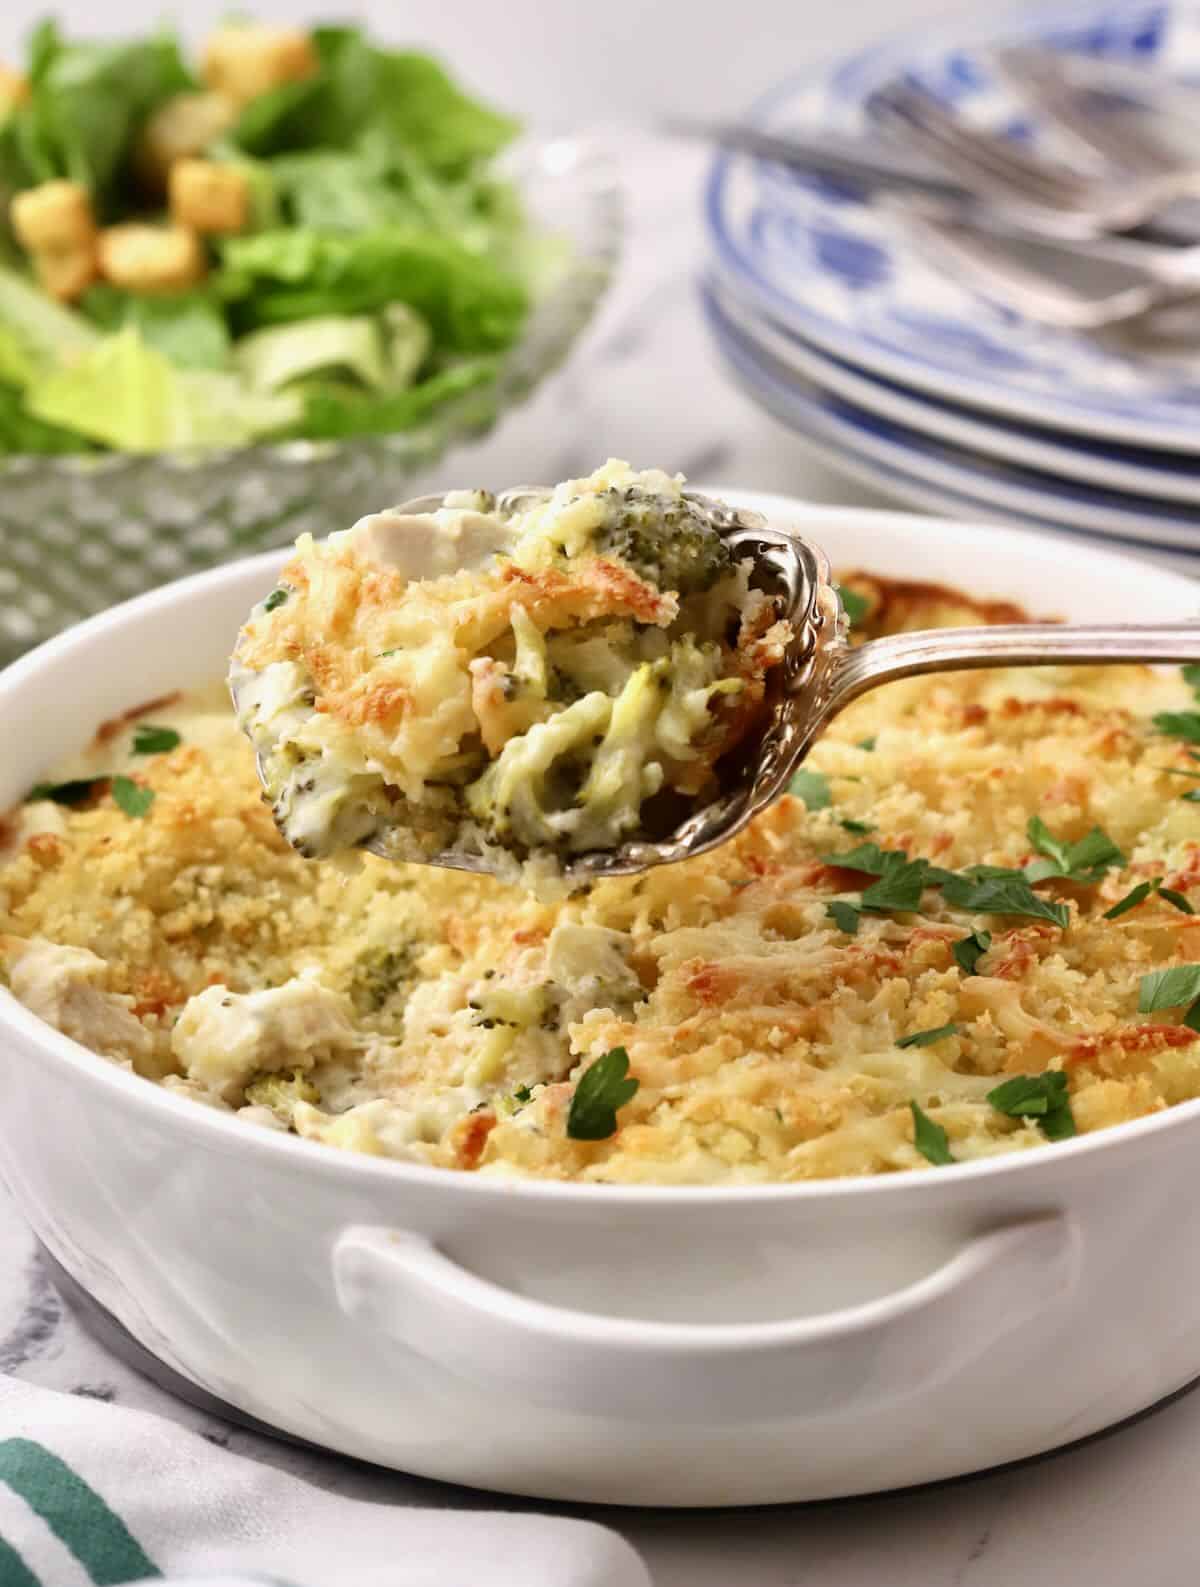 A large spoonful of chicken divan above the casserole. the